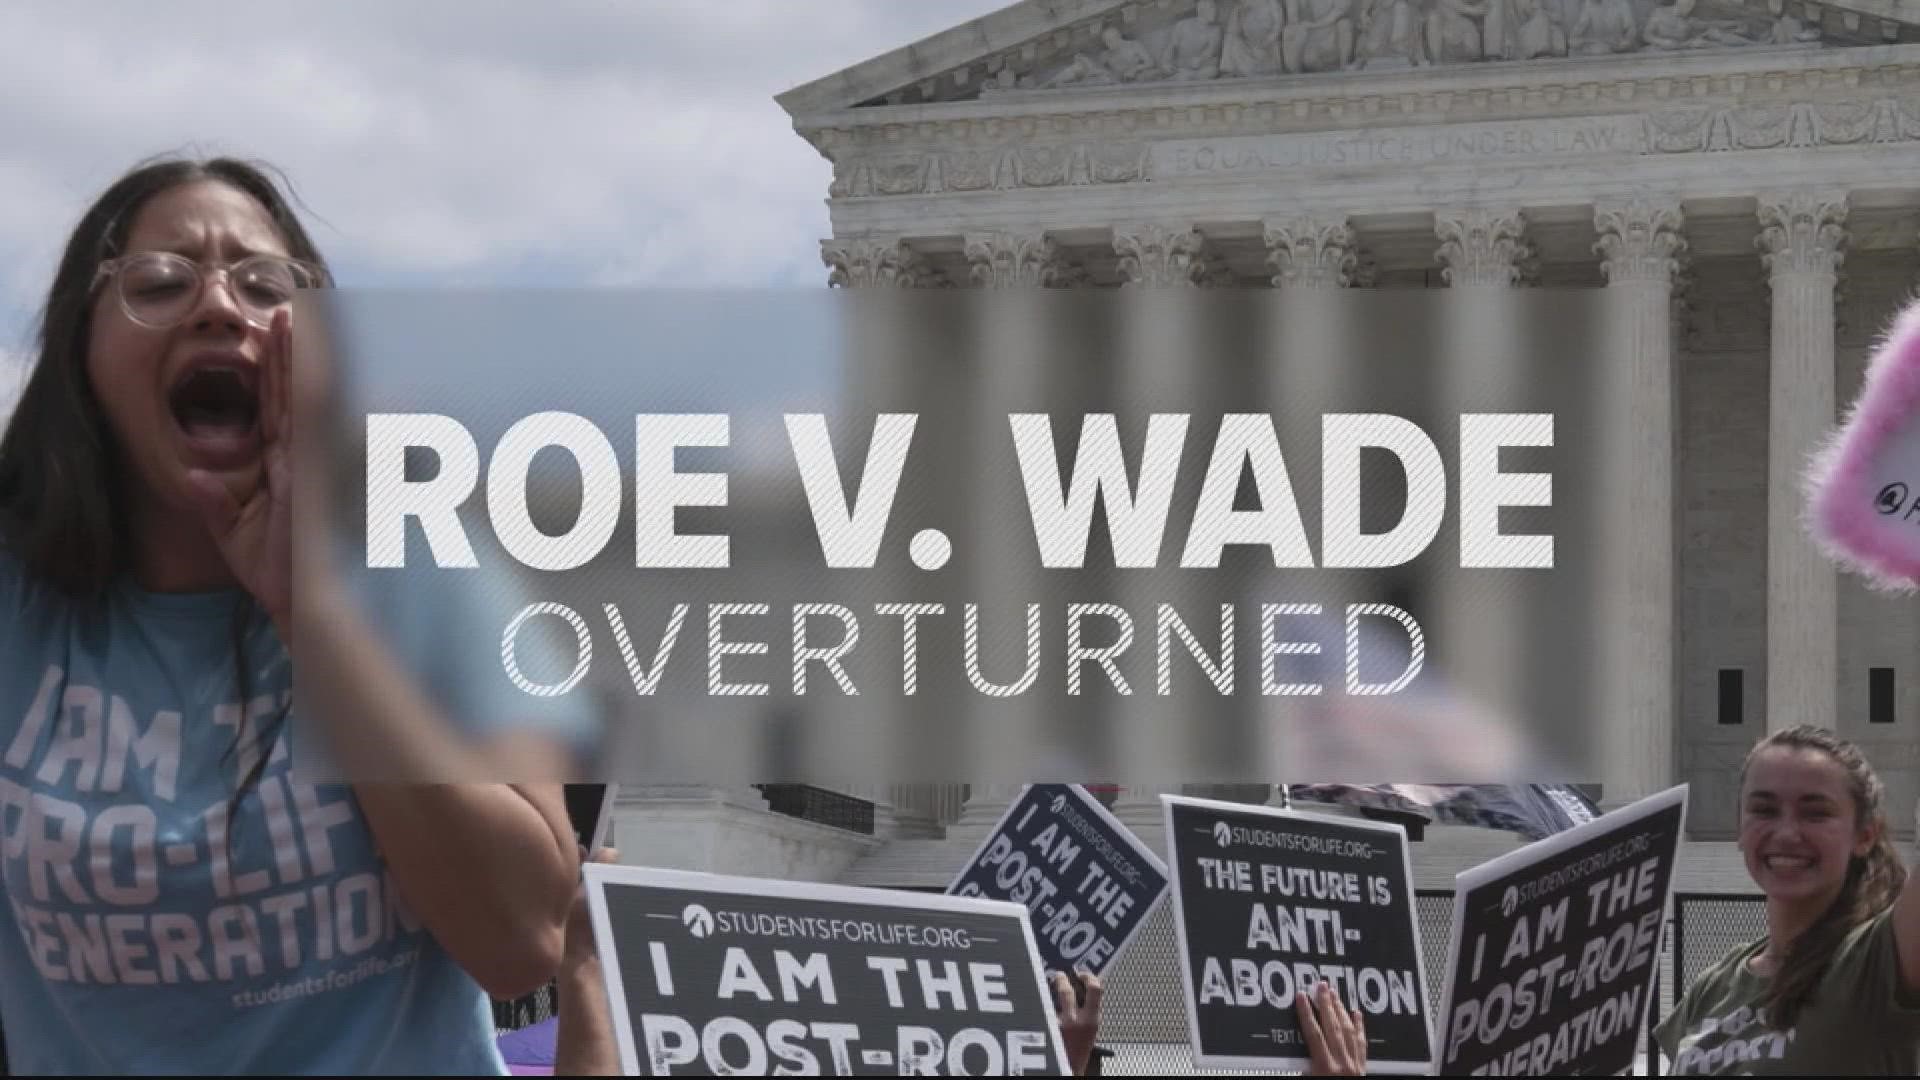 Protests continued in cities across the country after the Supreme Court's decision to overturn Roe v. Wade ruling that had guaranteed the right to abortion.